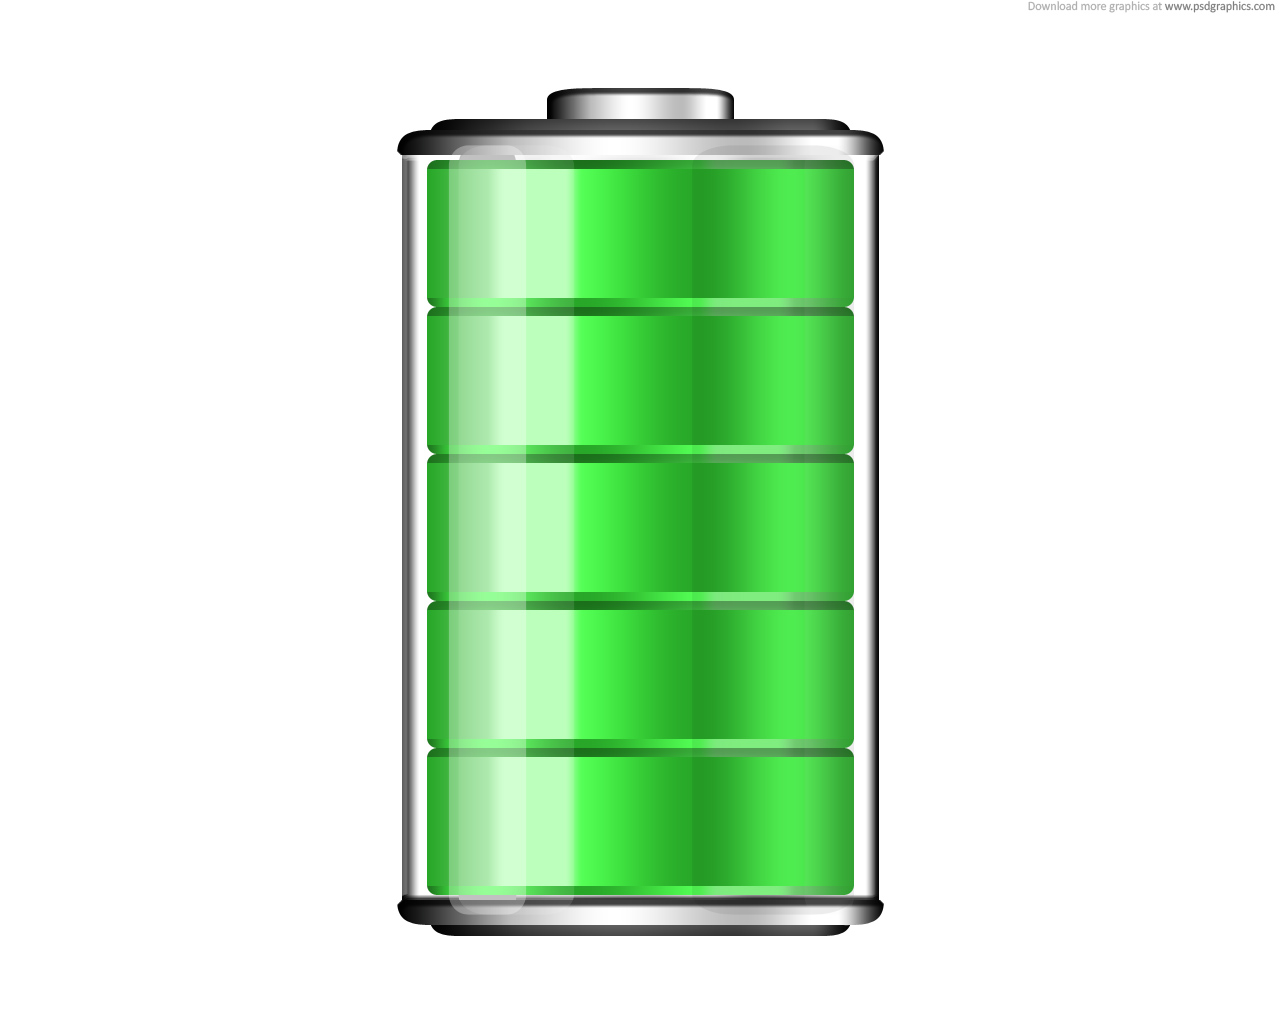 Download : Full battery icon - Vector Graphic